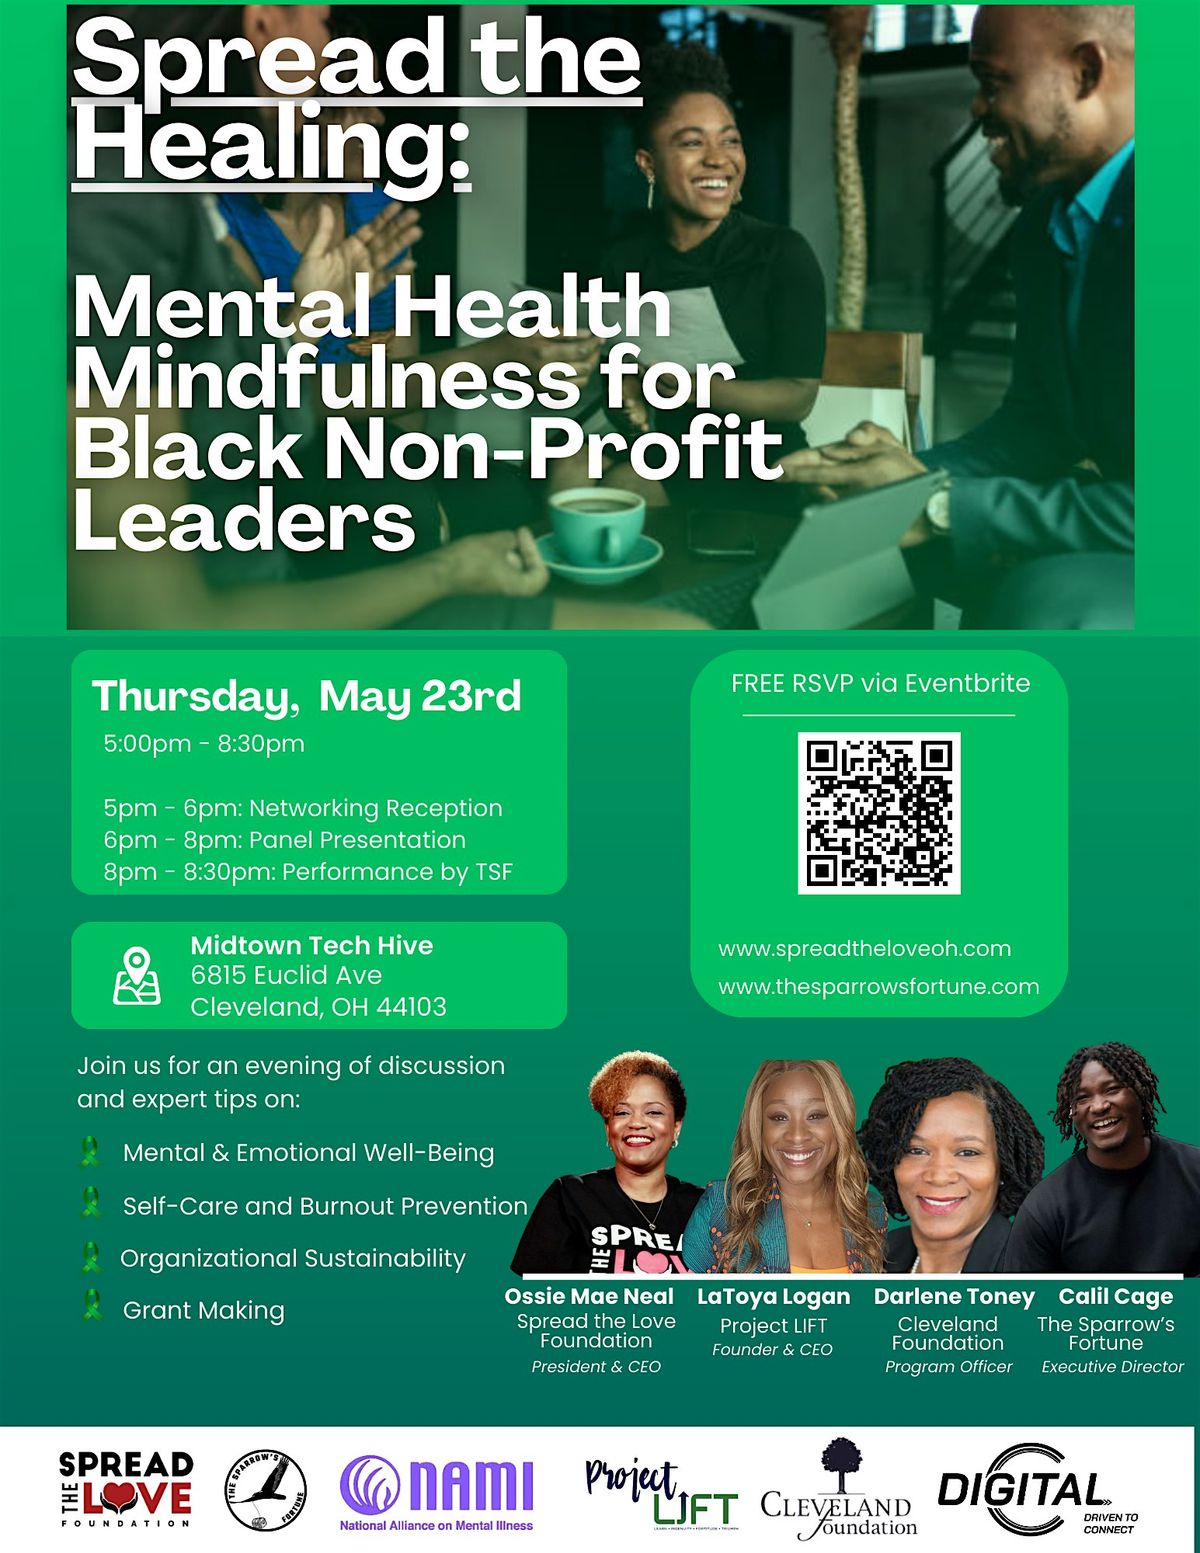 Spread the Healing: Mental Health Mindfulness for Black Non-Profit Leaders